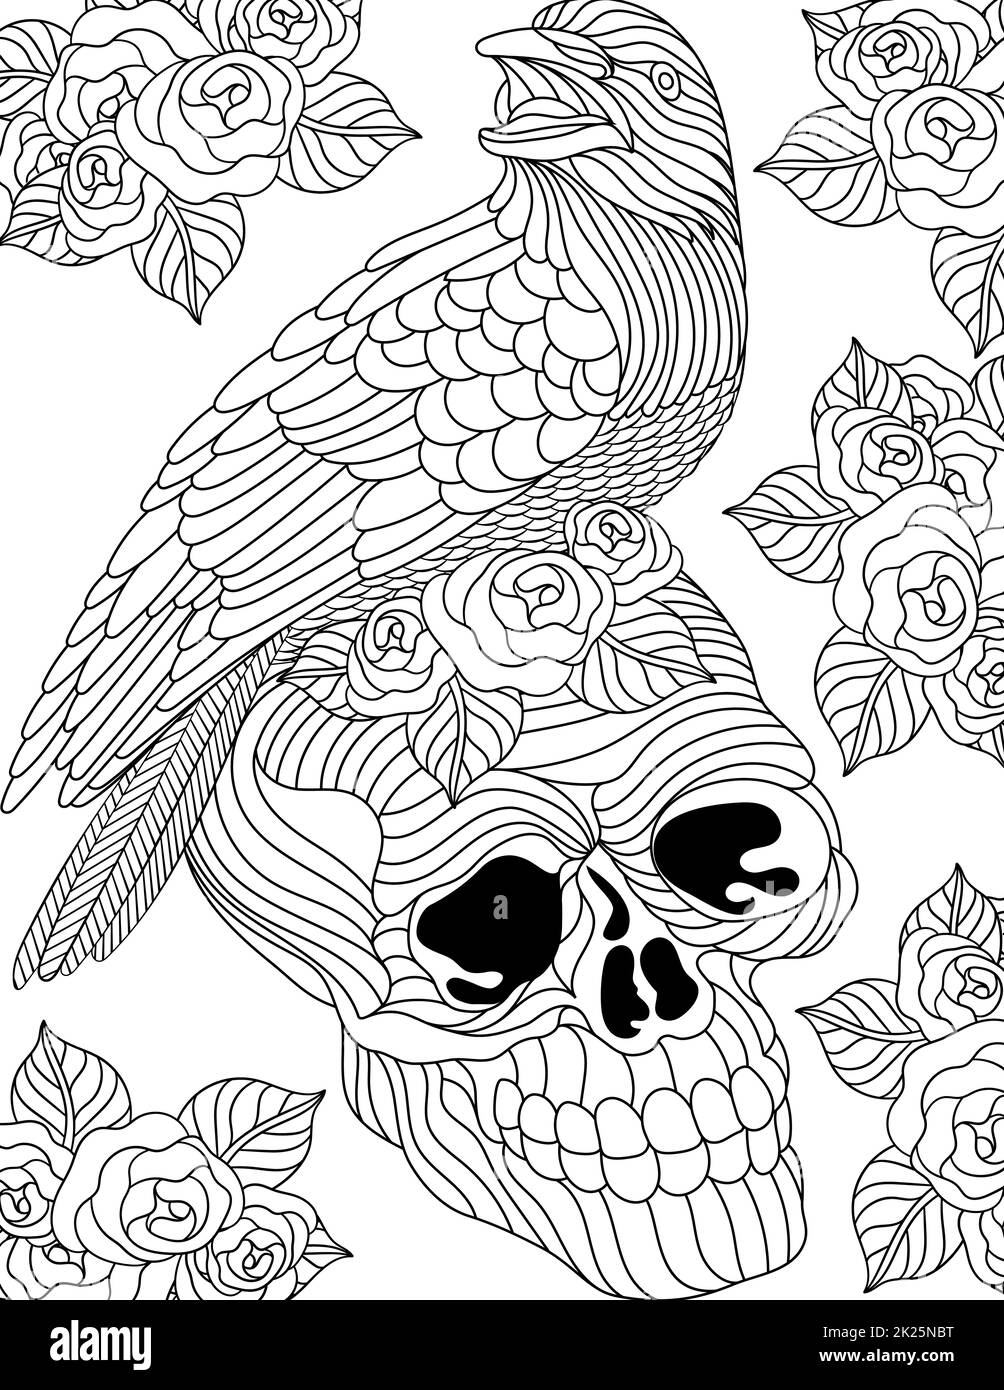 Raven Line Drawing Standing On Skull Surreounded With Flowers Tattoo Coloring Book Stock Photo